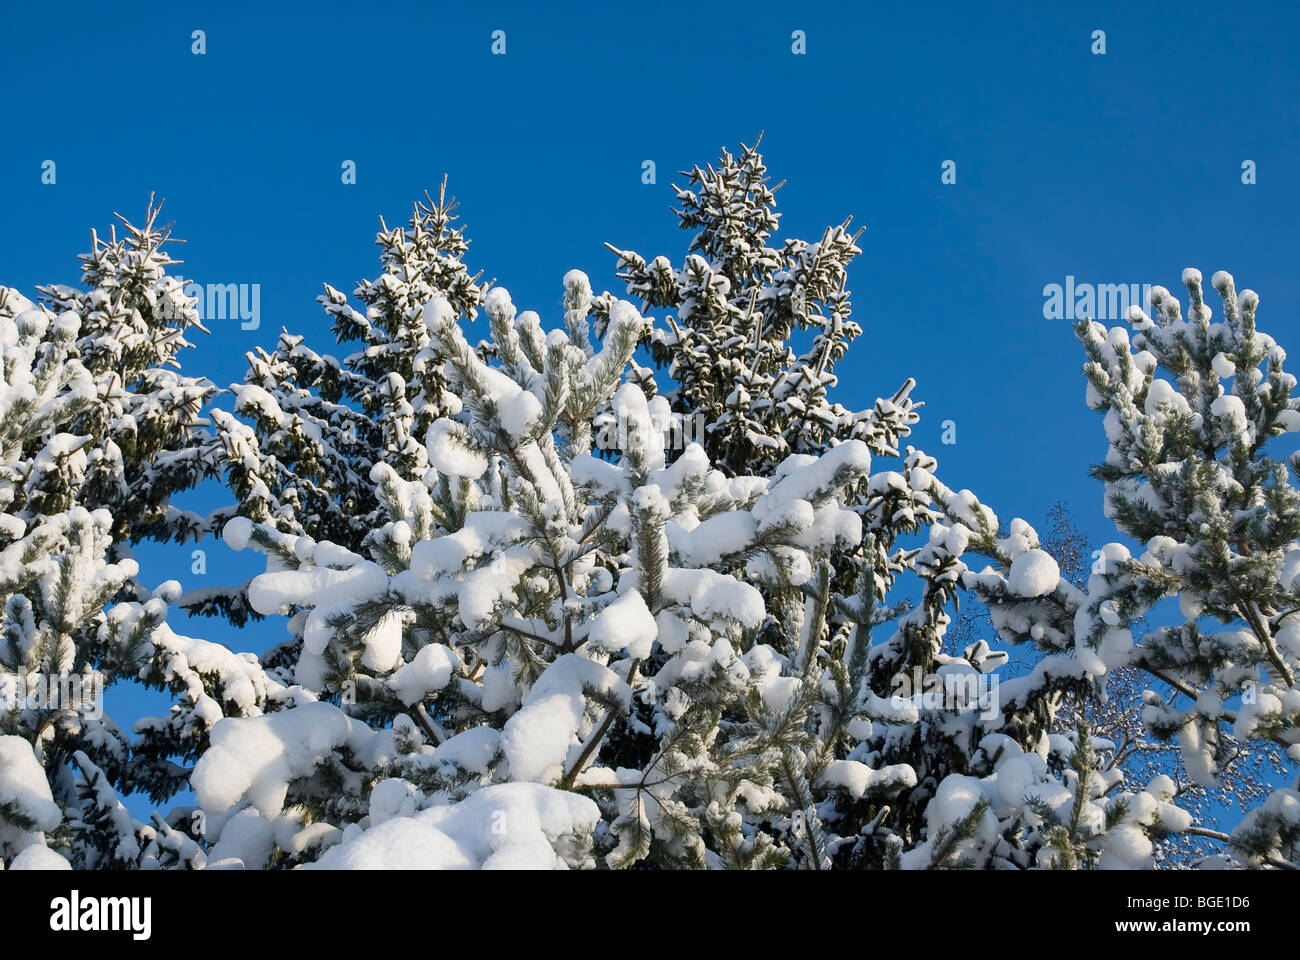 Evergreen branches on white Stock Photo by ©Nataly-Nete 174071470